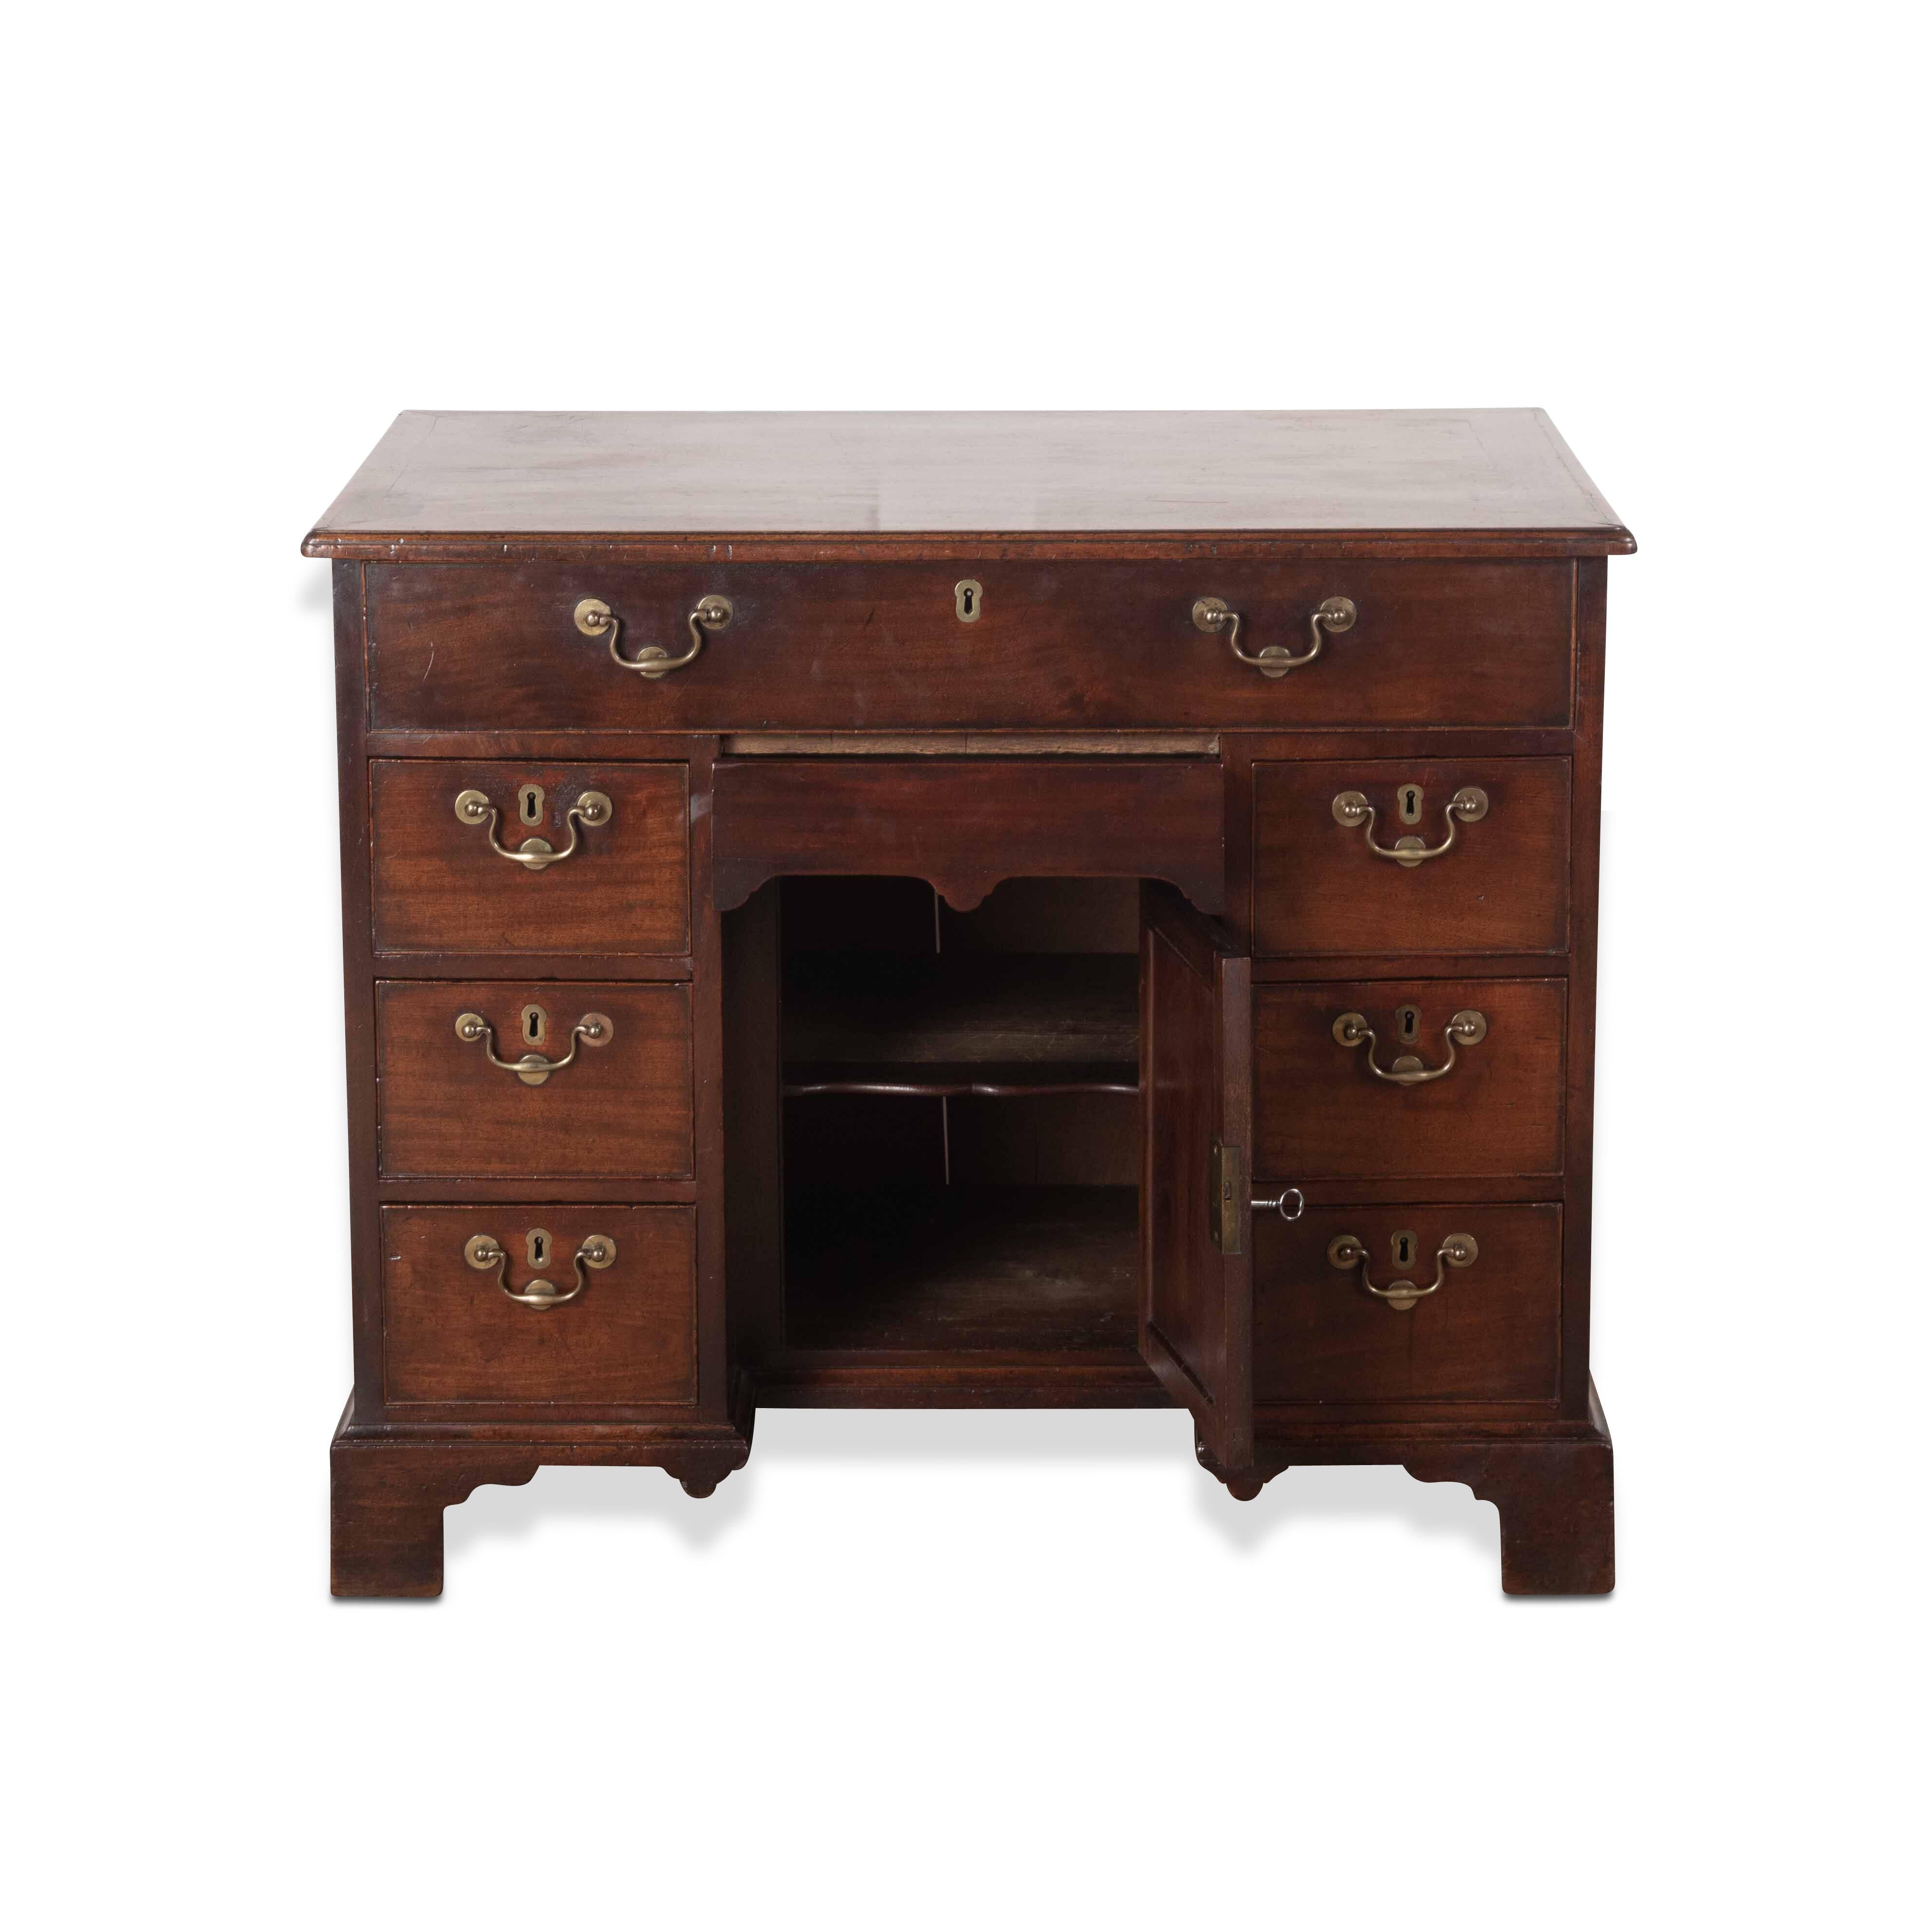 Mid-18th Century C18th Mahogany `Grendy` Kneehole Desk For Sale